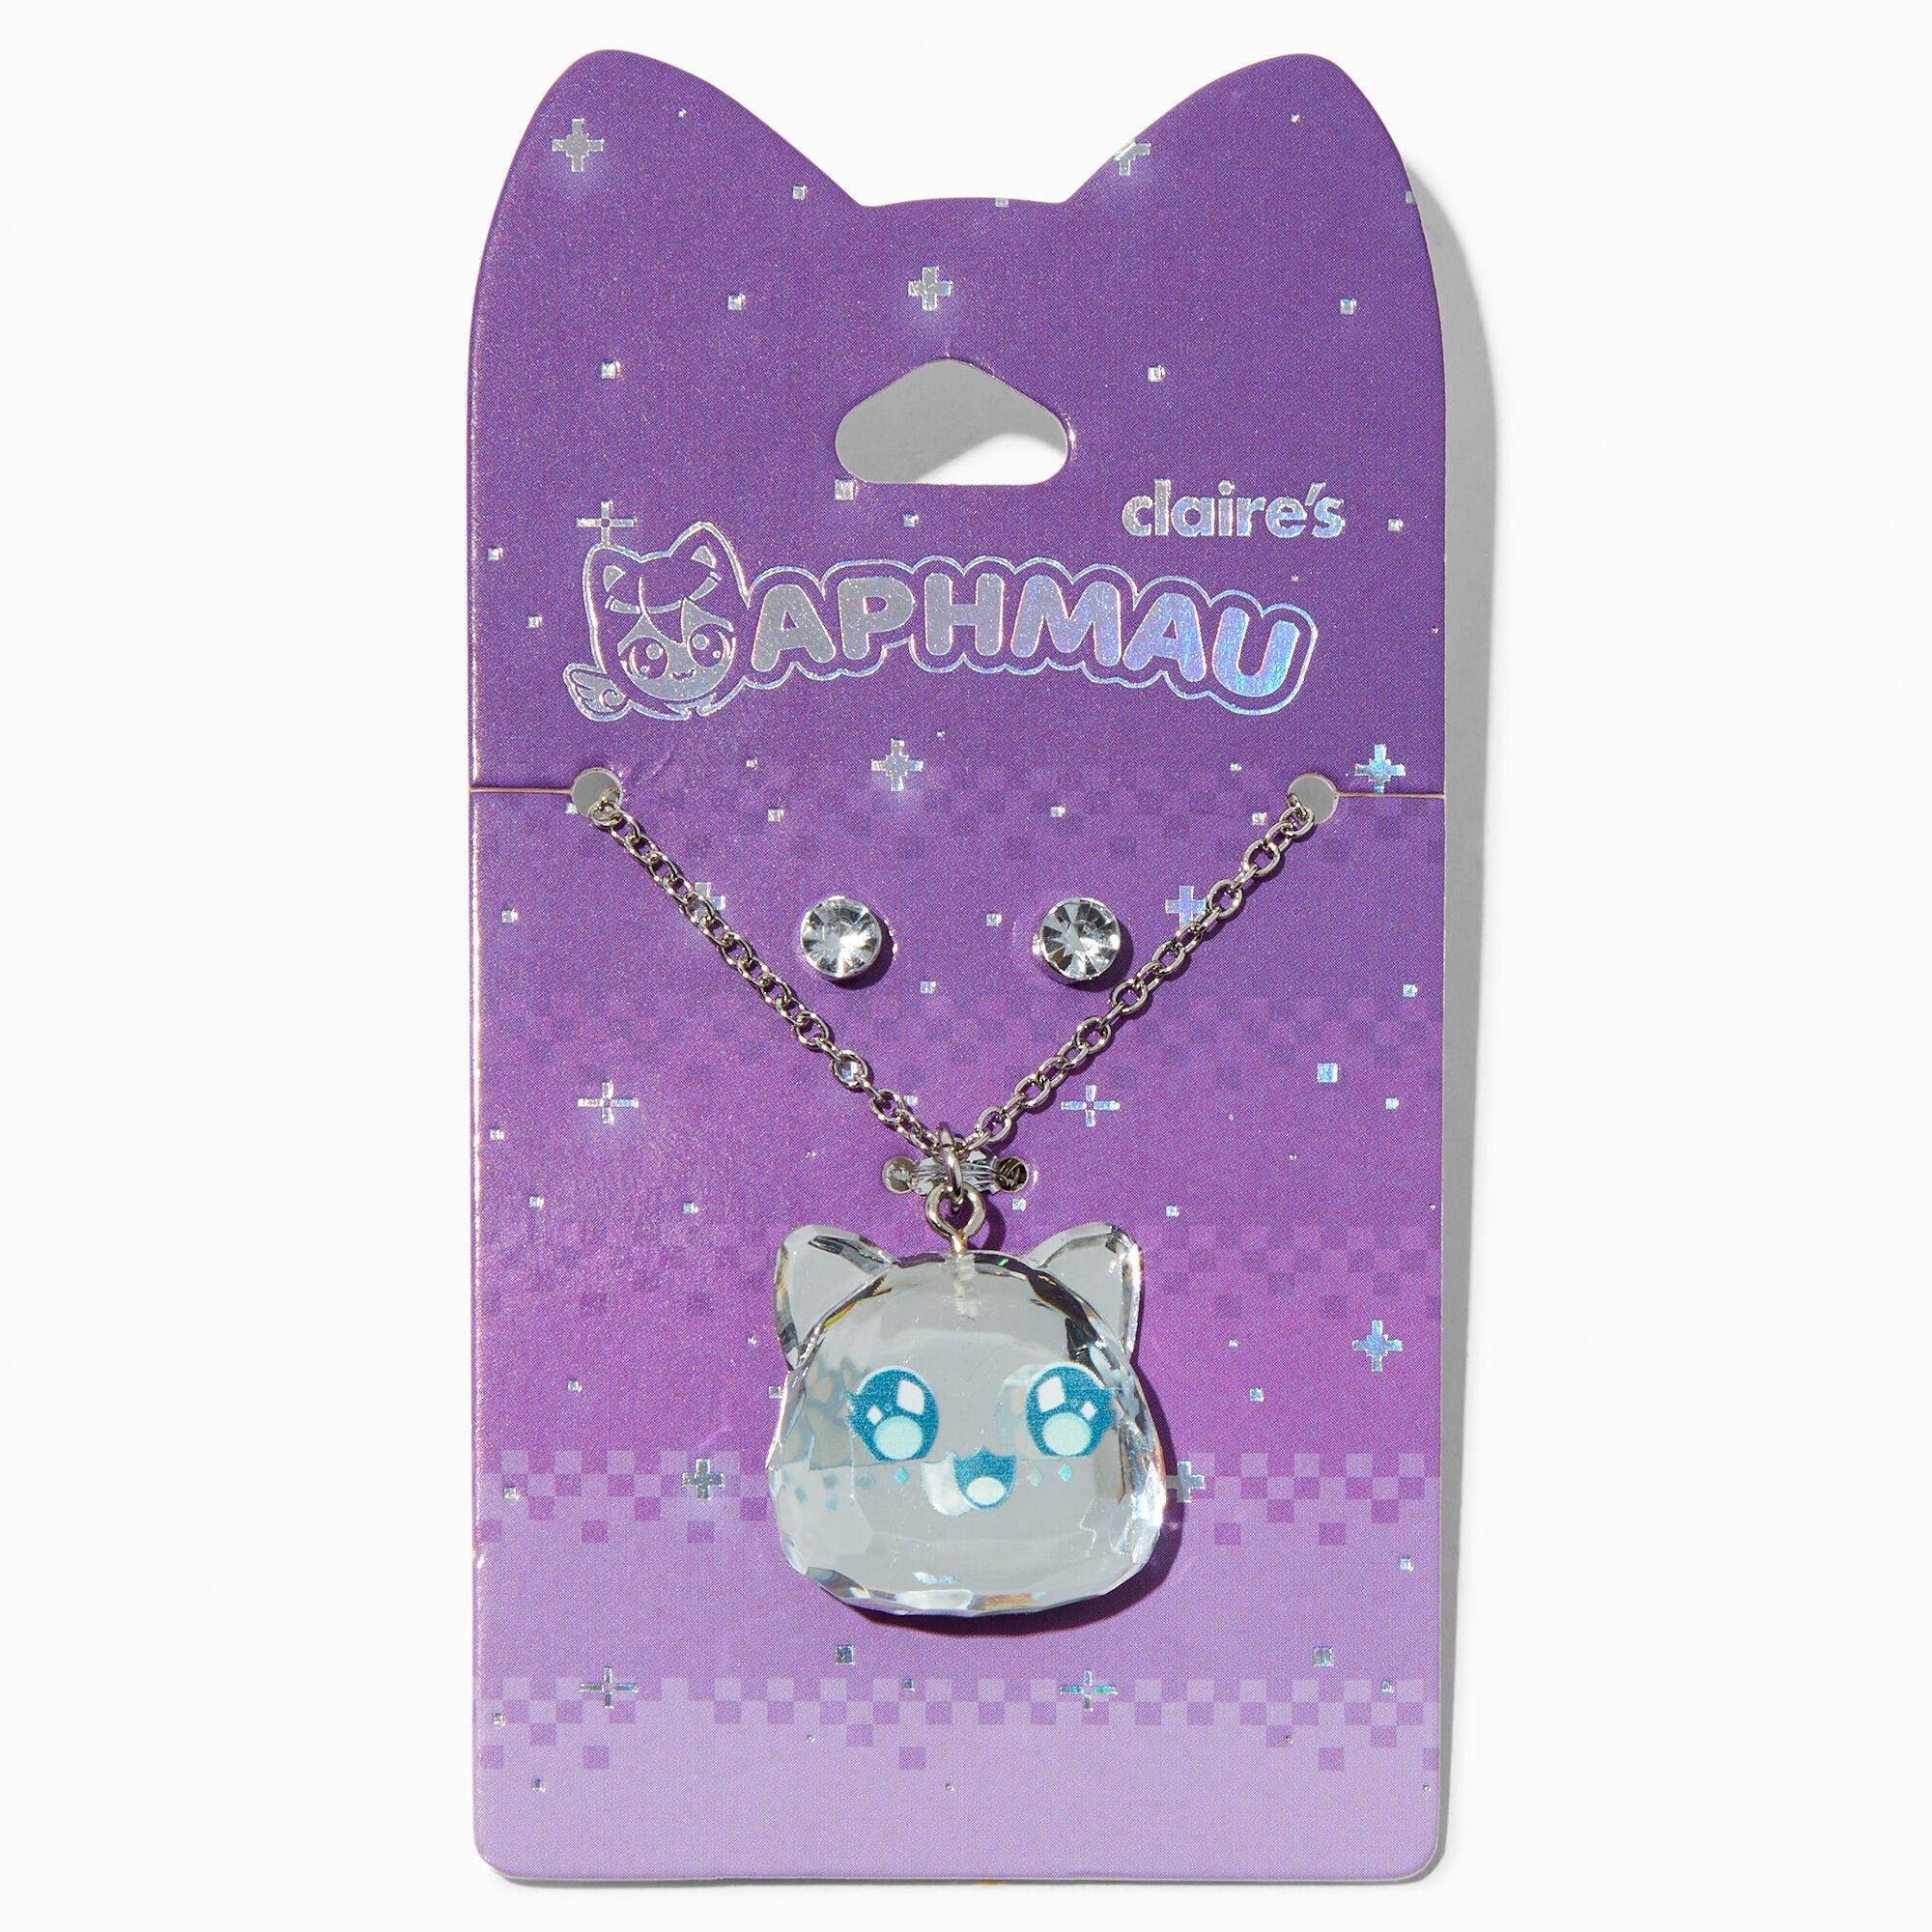 View Aphmau Claires Exclusive Diamond Cat Necklace Earrings Set 2 Pack information